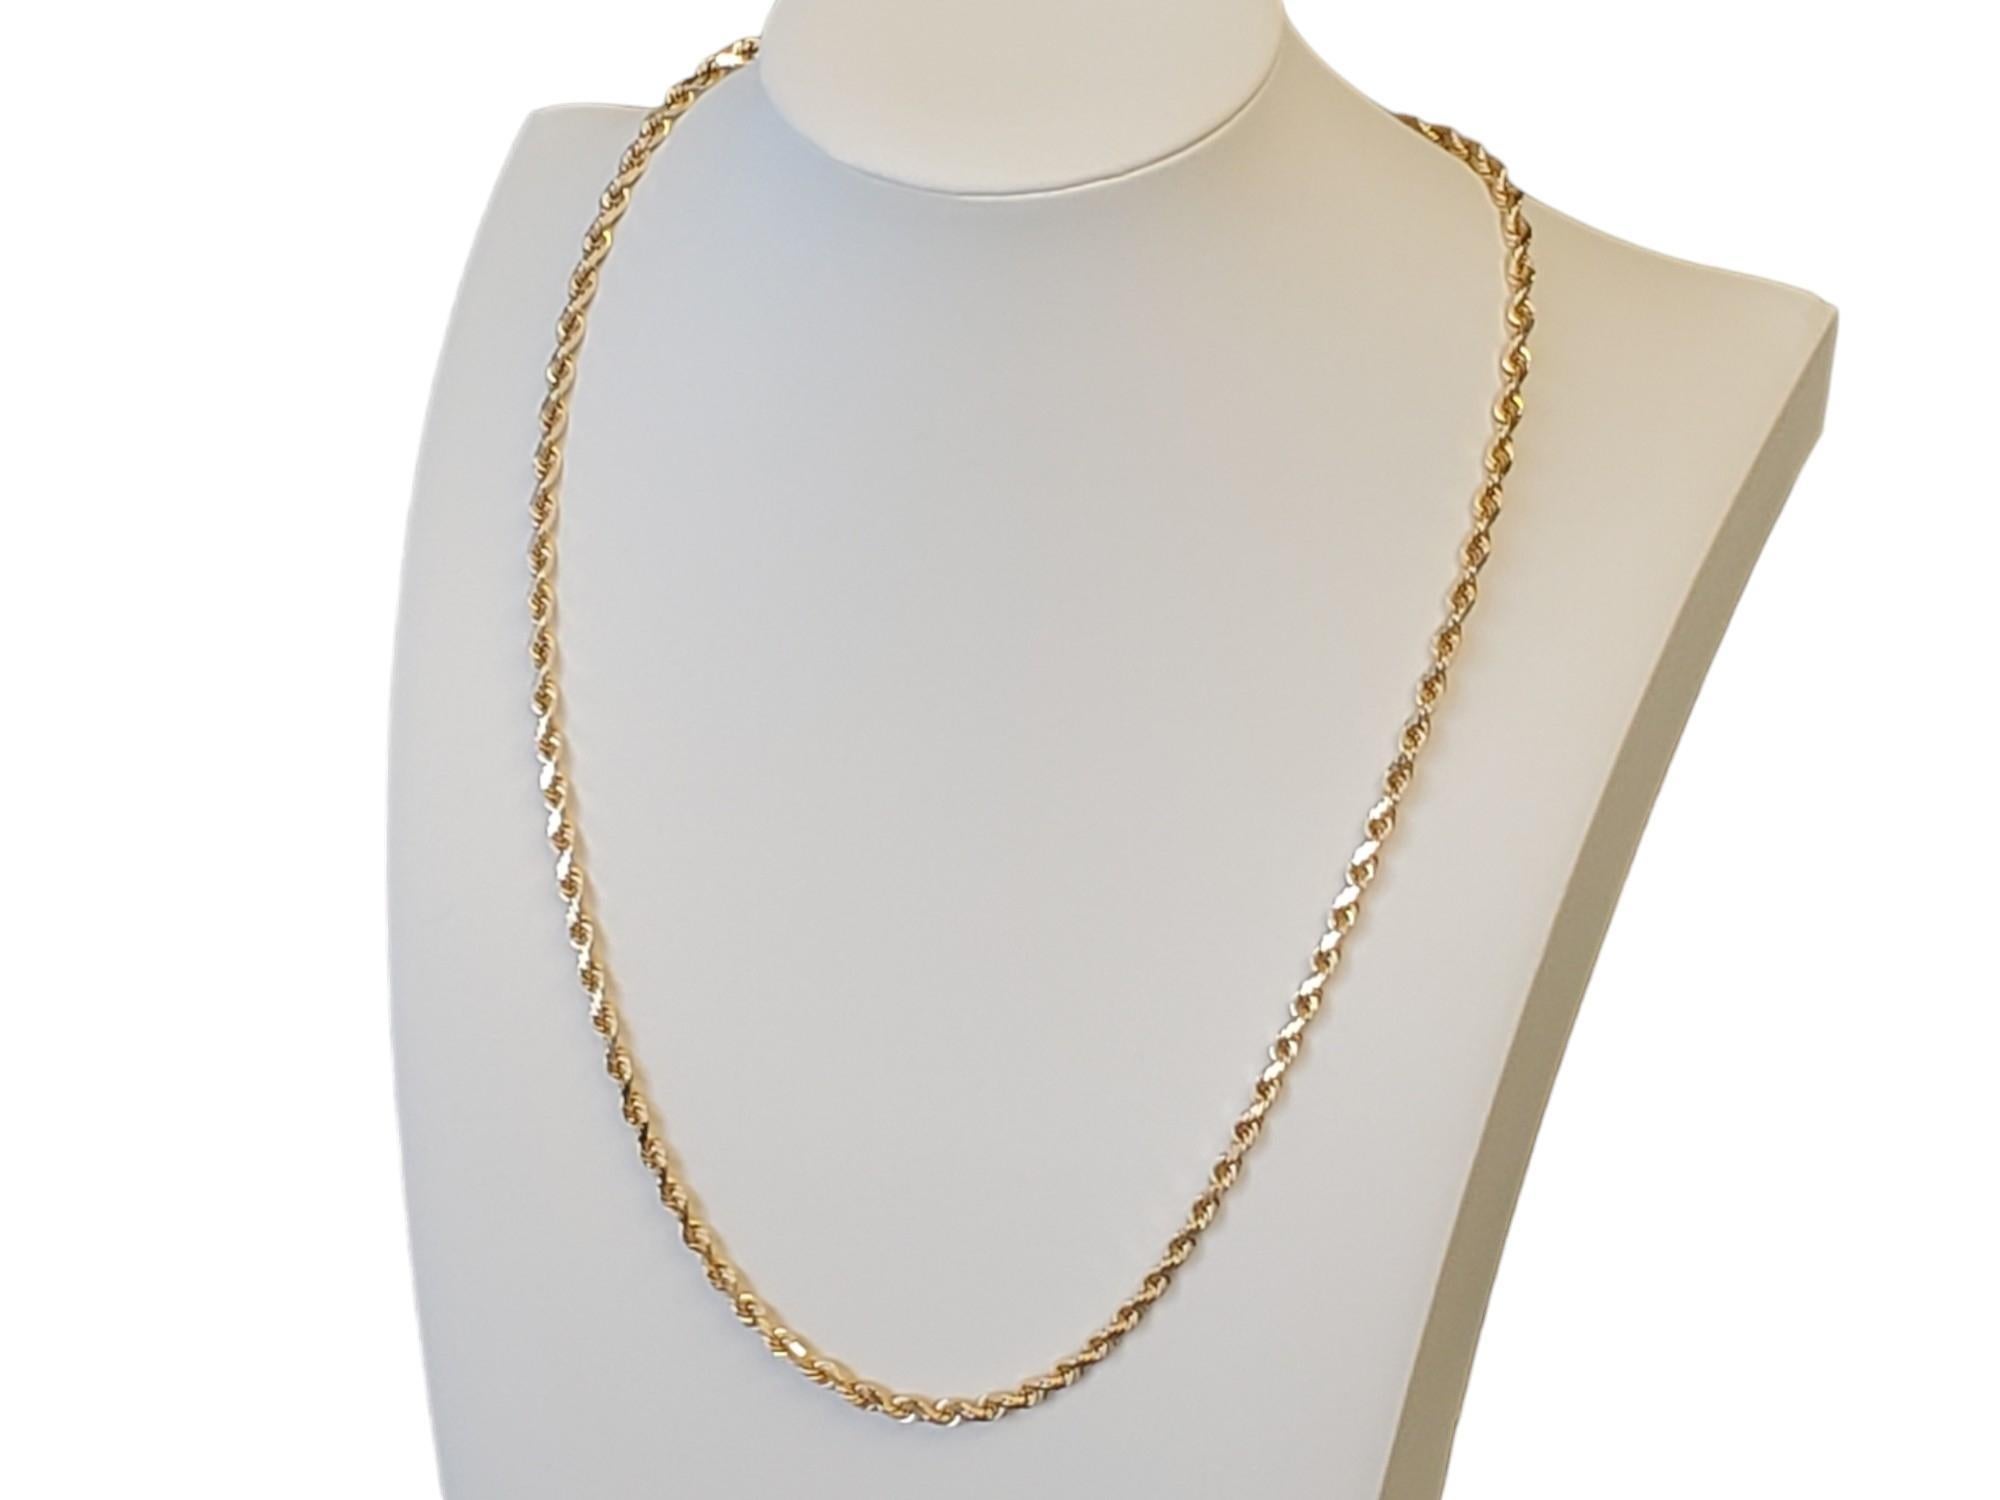 Women's or Men's 10K Yellow Gold Heavy Diamond Cut Rope Chain Necklace Very Well Made 22